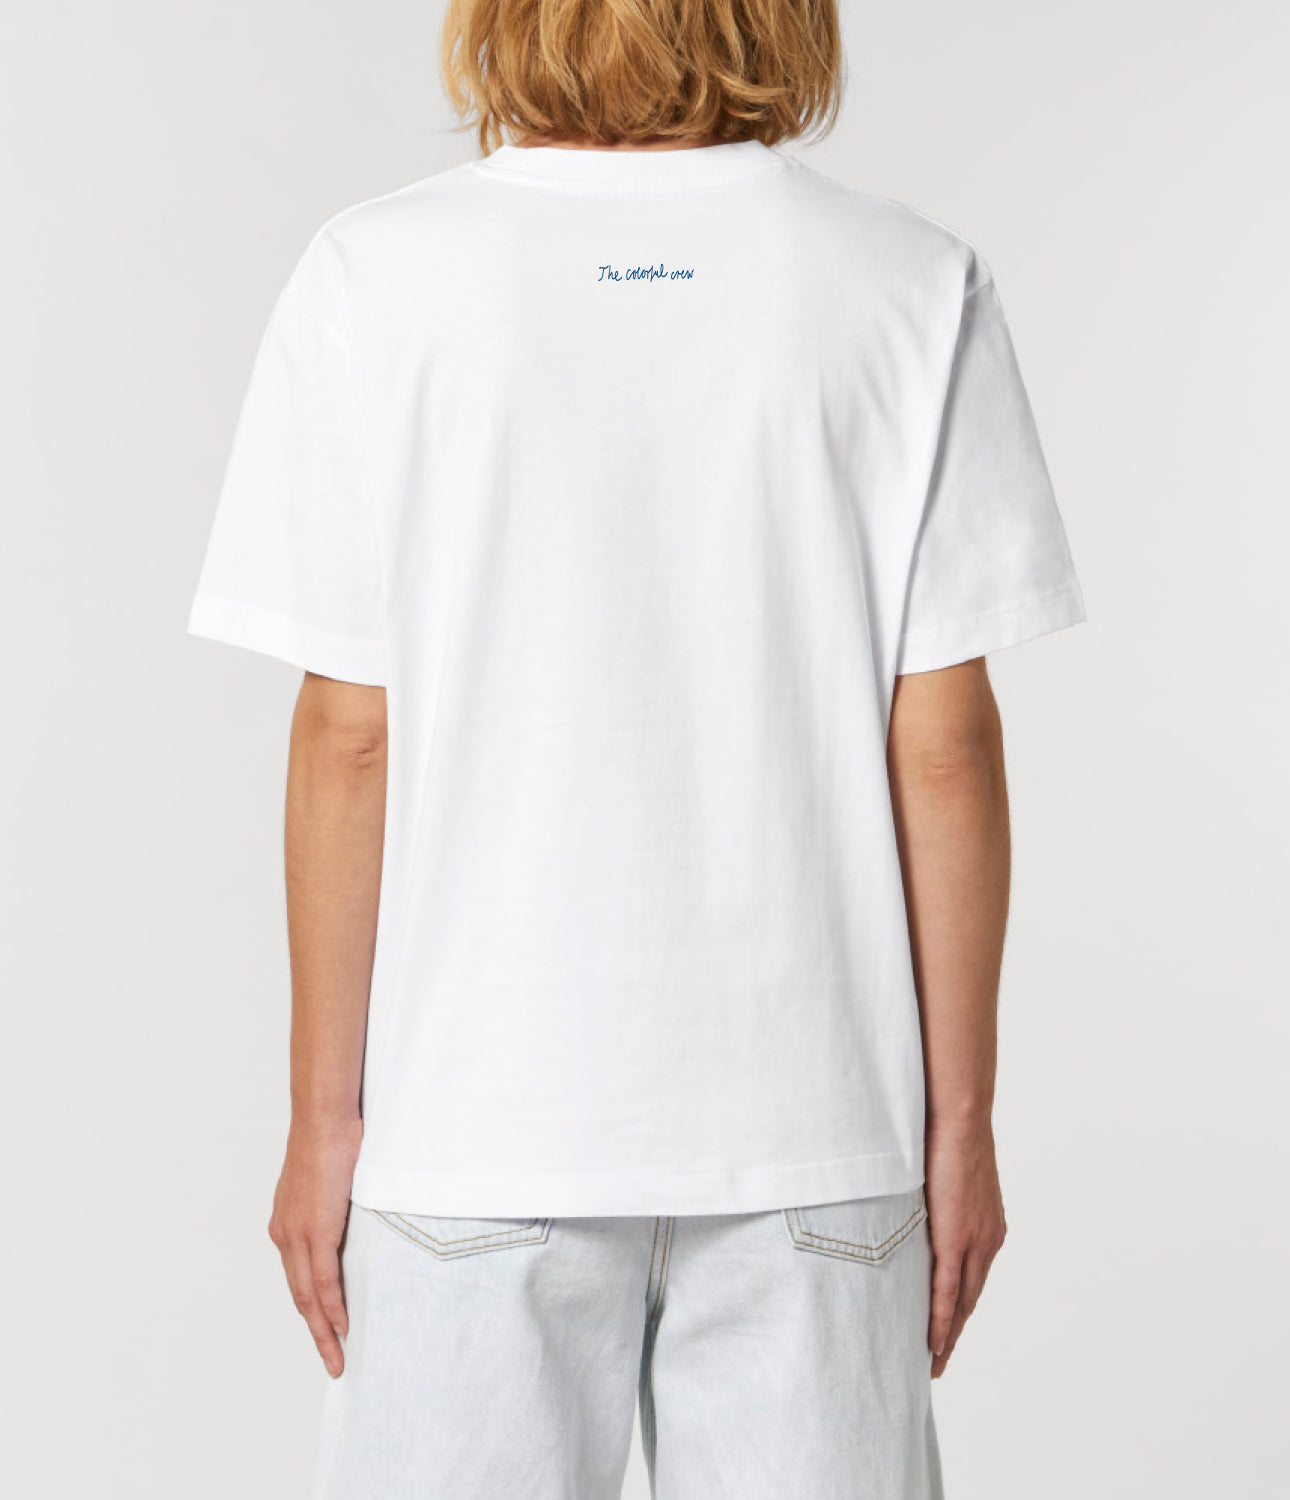 SALE // FUCKIT CLUB T-shirt // Limited Edition